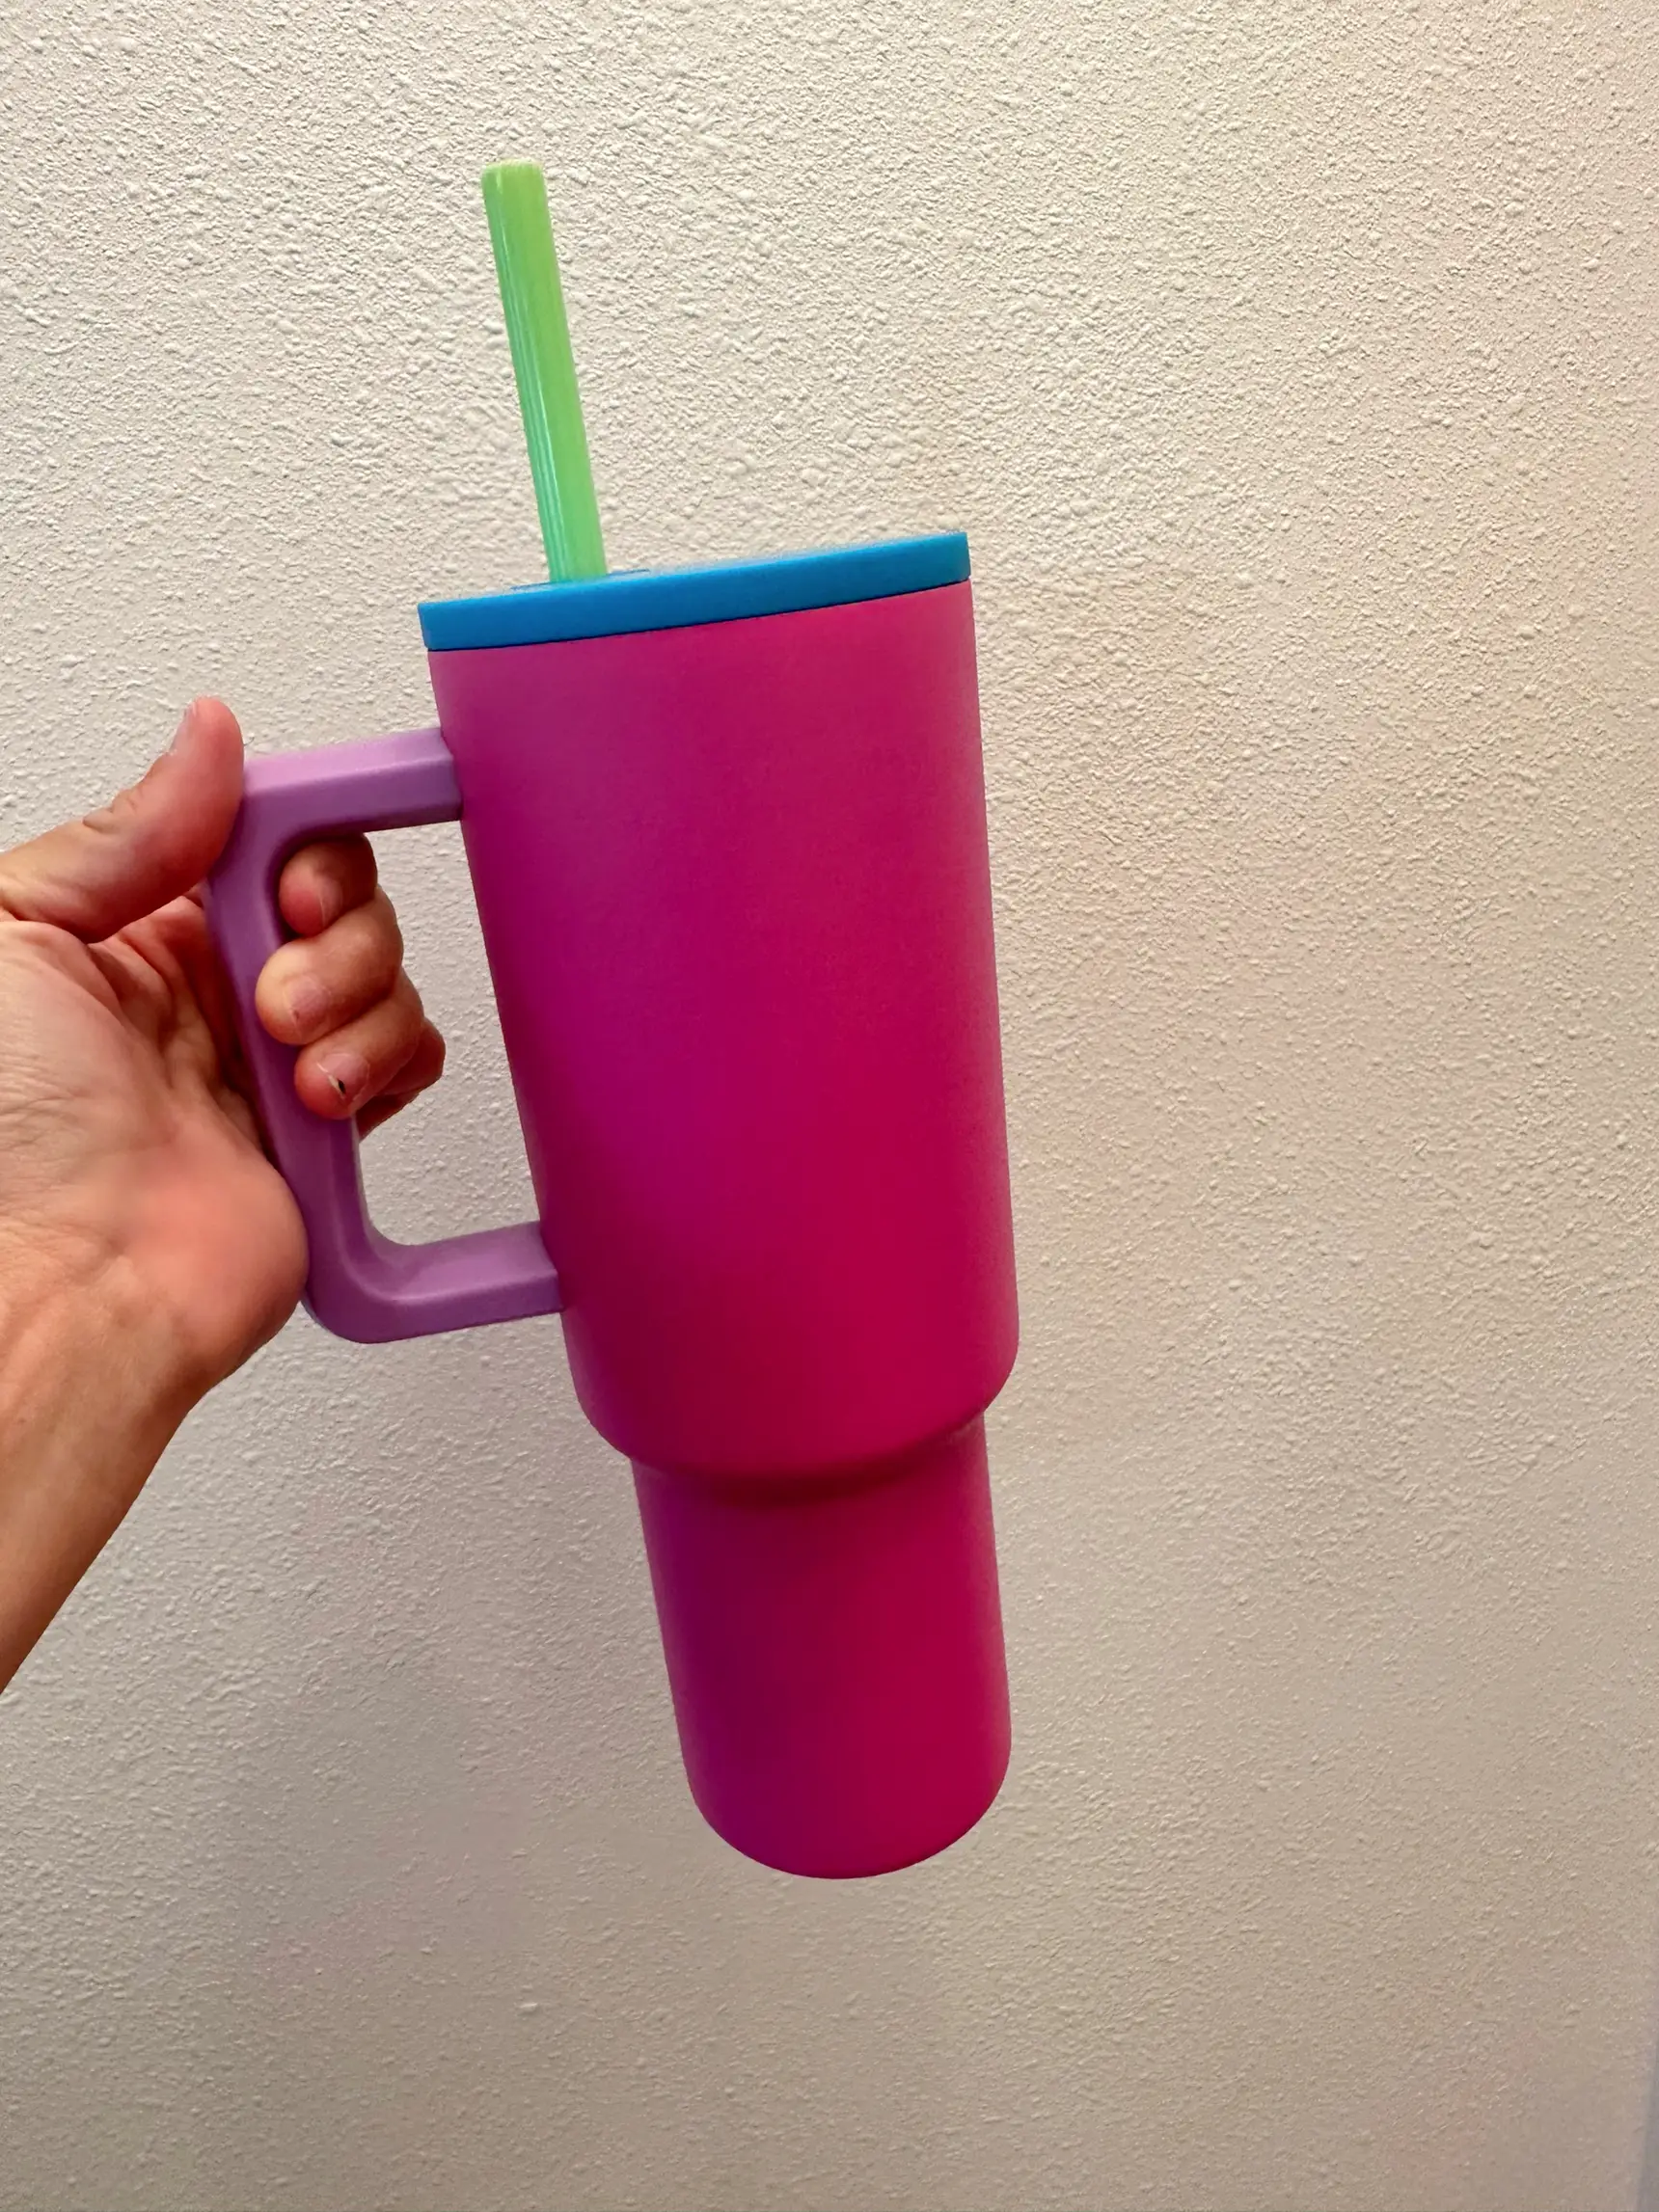 Im obsessed with this new 80s themed @Simple Modern tumbler. Im so gla